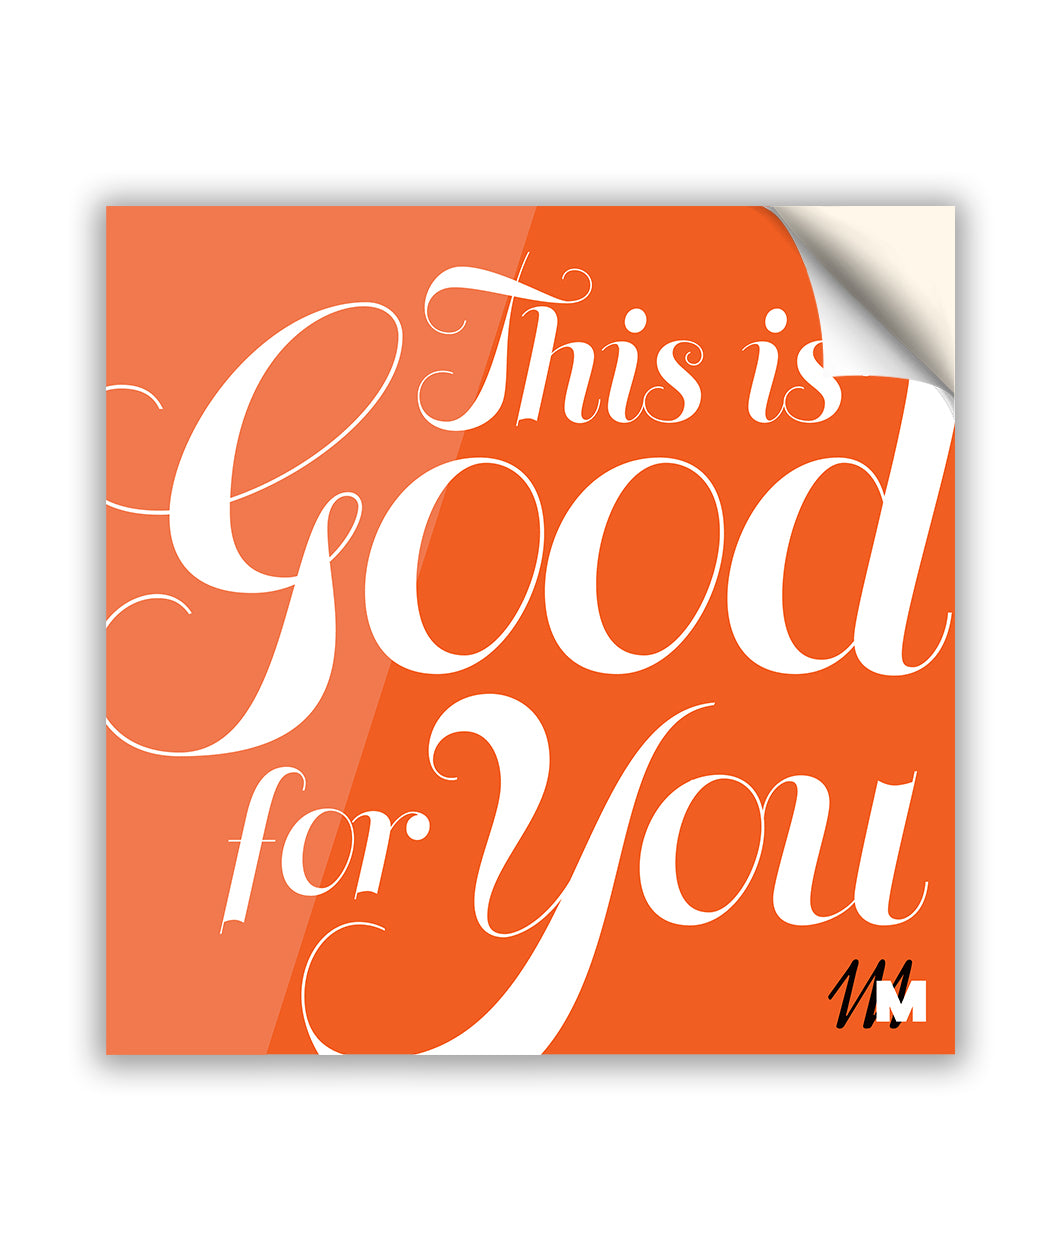 A square, bright orange sticker. The white text “This is Good for You” fills up the sticker in a fancy script font. In the bottom right corner of the sticker is the Multitude logo – two overlapping Ms.